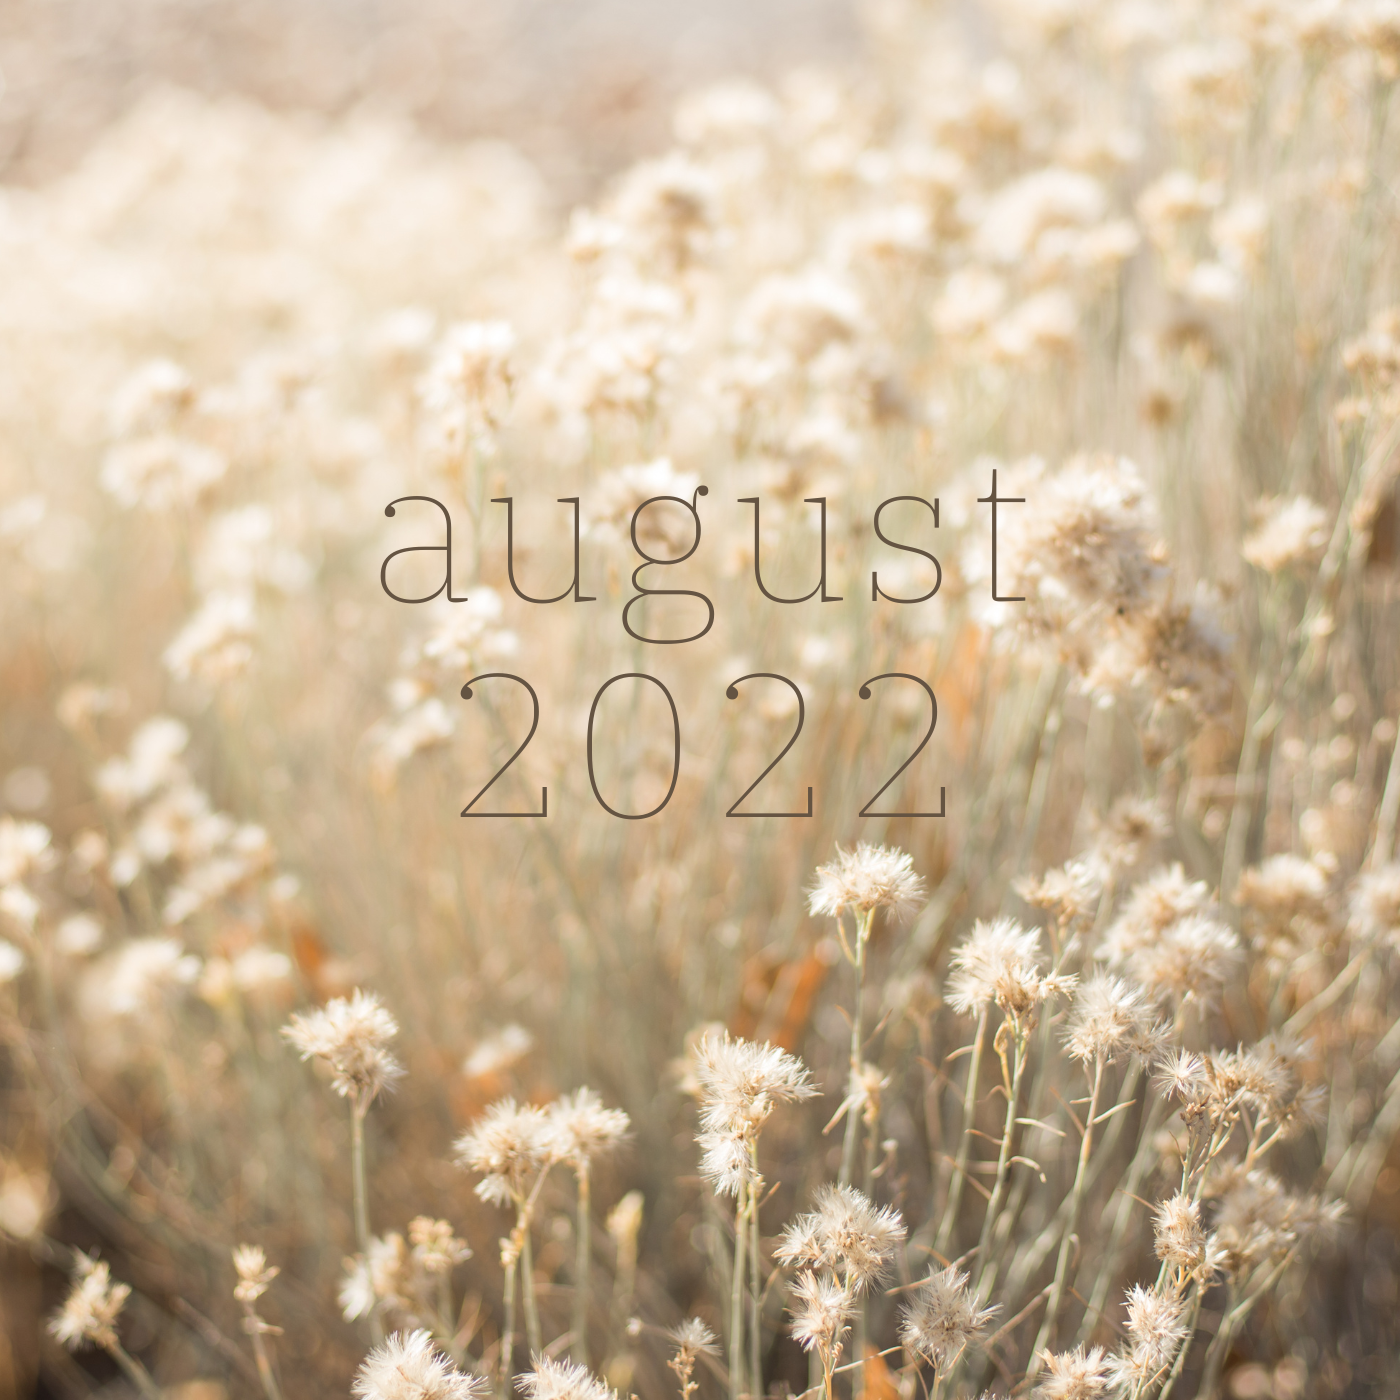 a bokeh heavy image of a field of white flowers with august 2022 in a serif font at the center